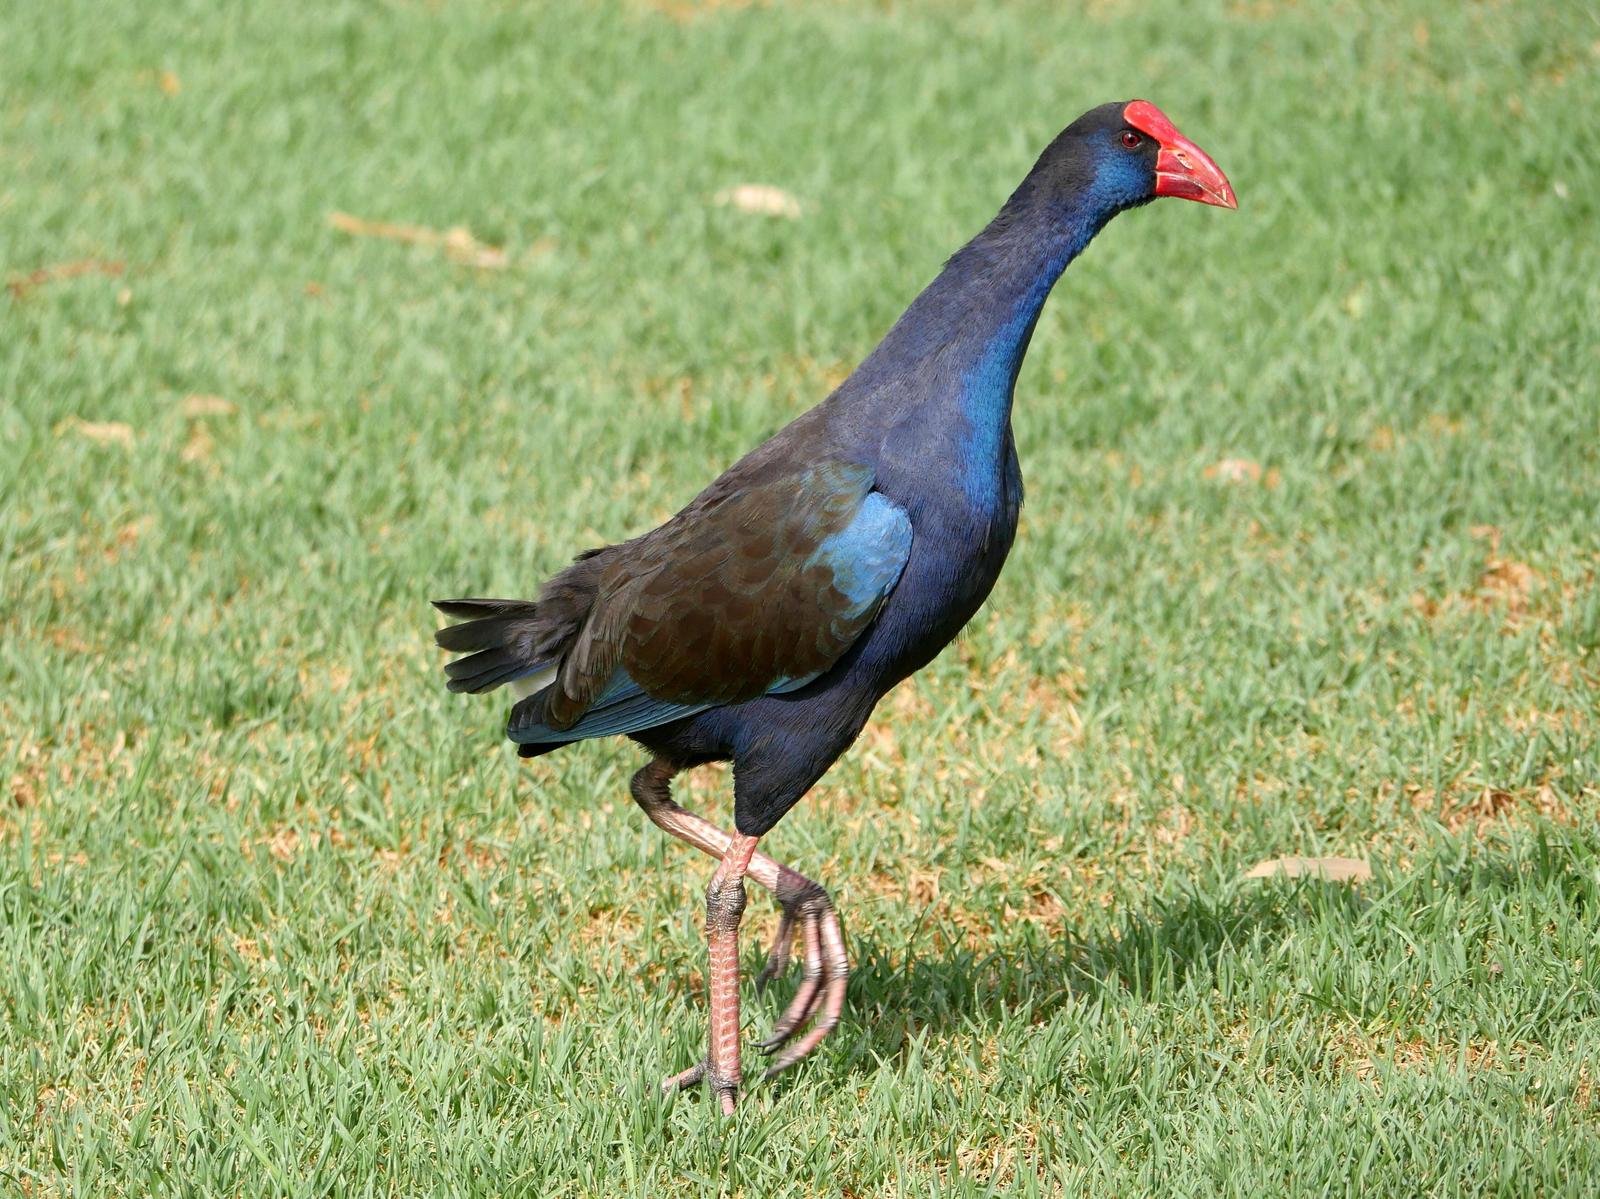 Australasian Swamphen Photo by Peter Lowe